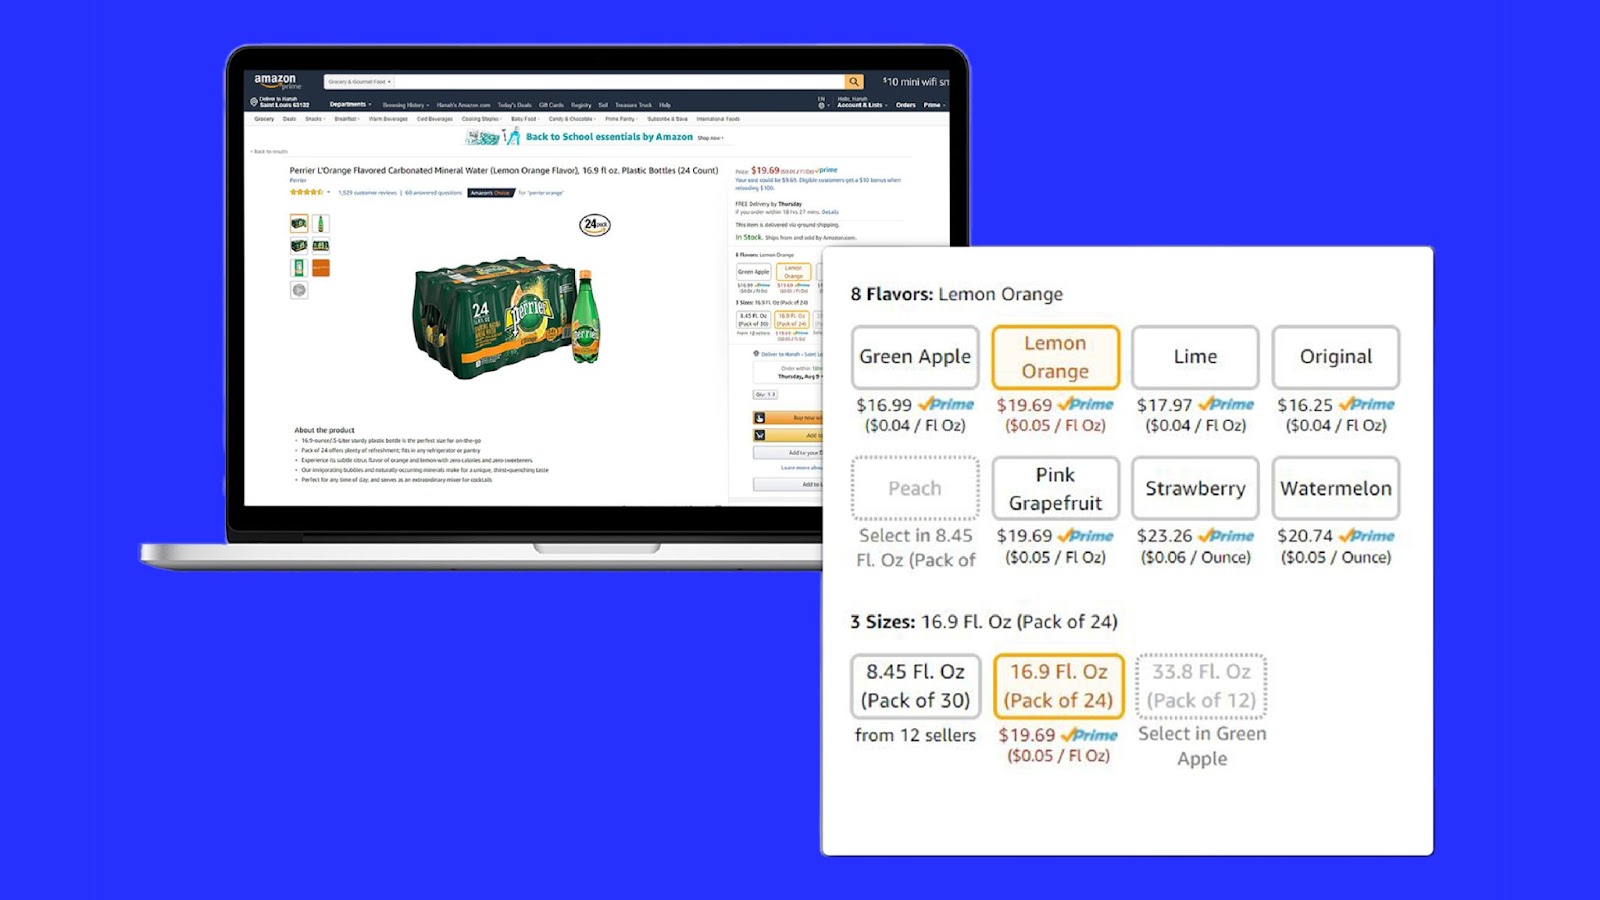 Here's A Screenshot That Represents Product Variation On Amazon